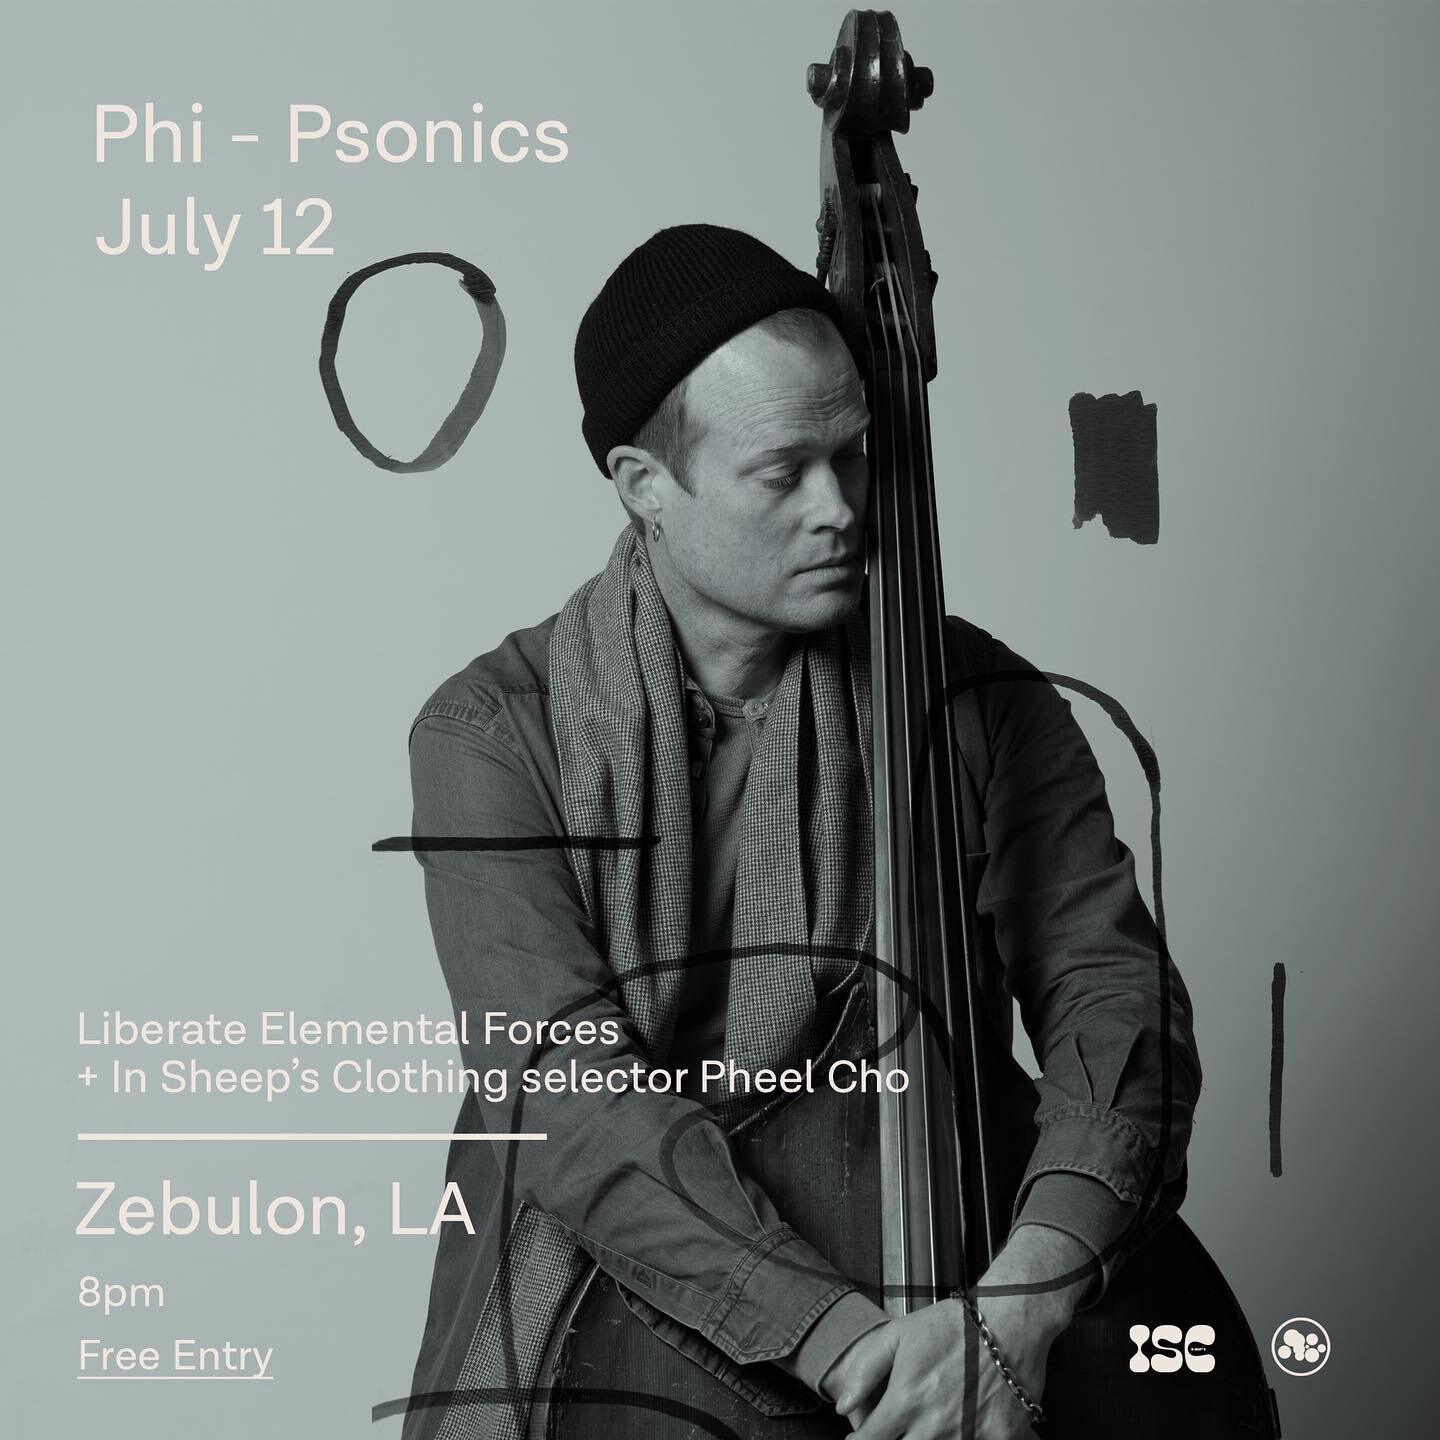 I&rsquo;m looking forward to playing @phi_psonics new album &lsquo;Octava&rsquo; @zebulonla next Wednesday 7/12! We&rsquo;re going to play the whole album along with some old favorites from The Cradle. I&rsquo;m honored to have Randal Fisher  @rfishe